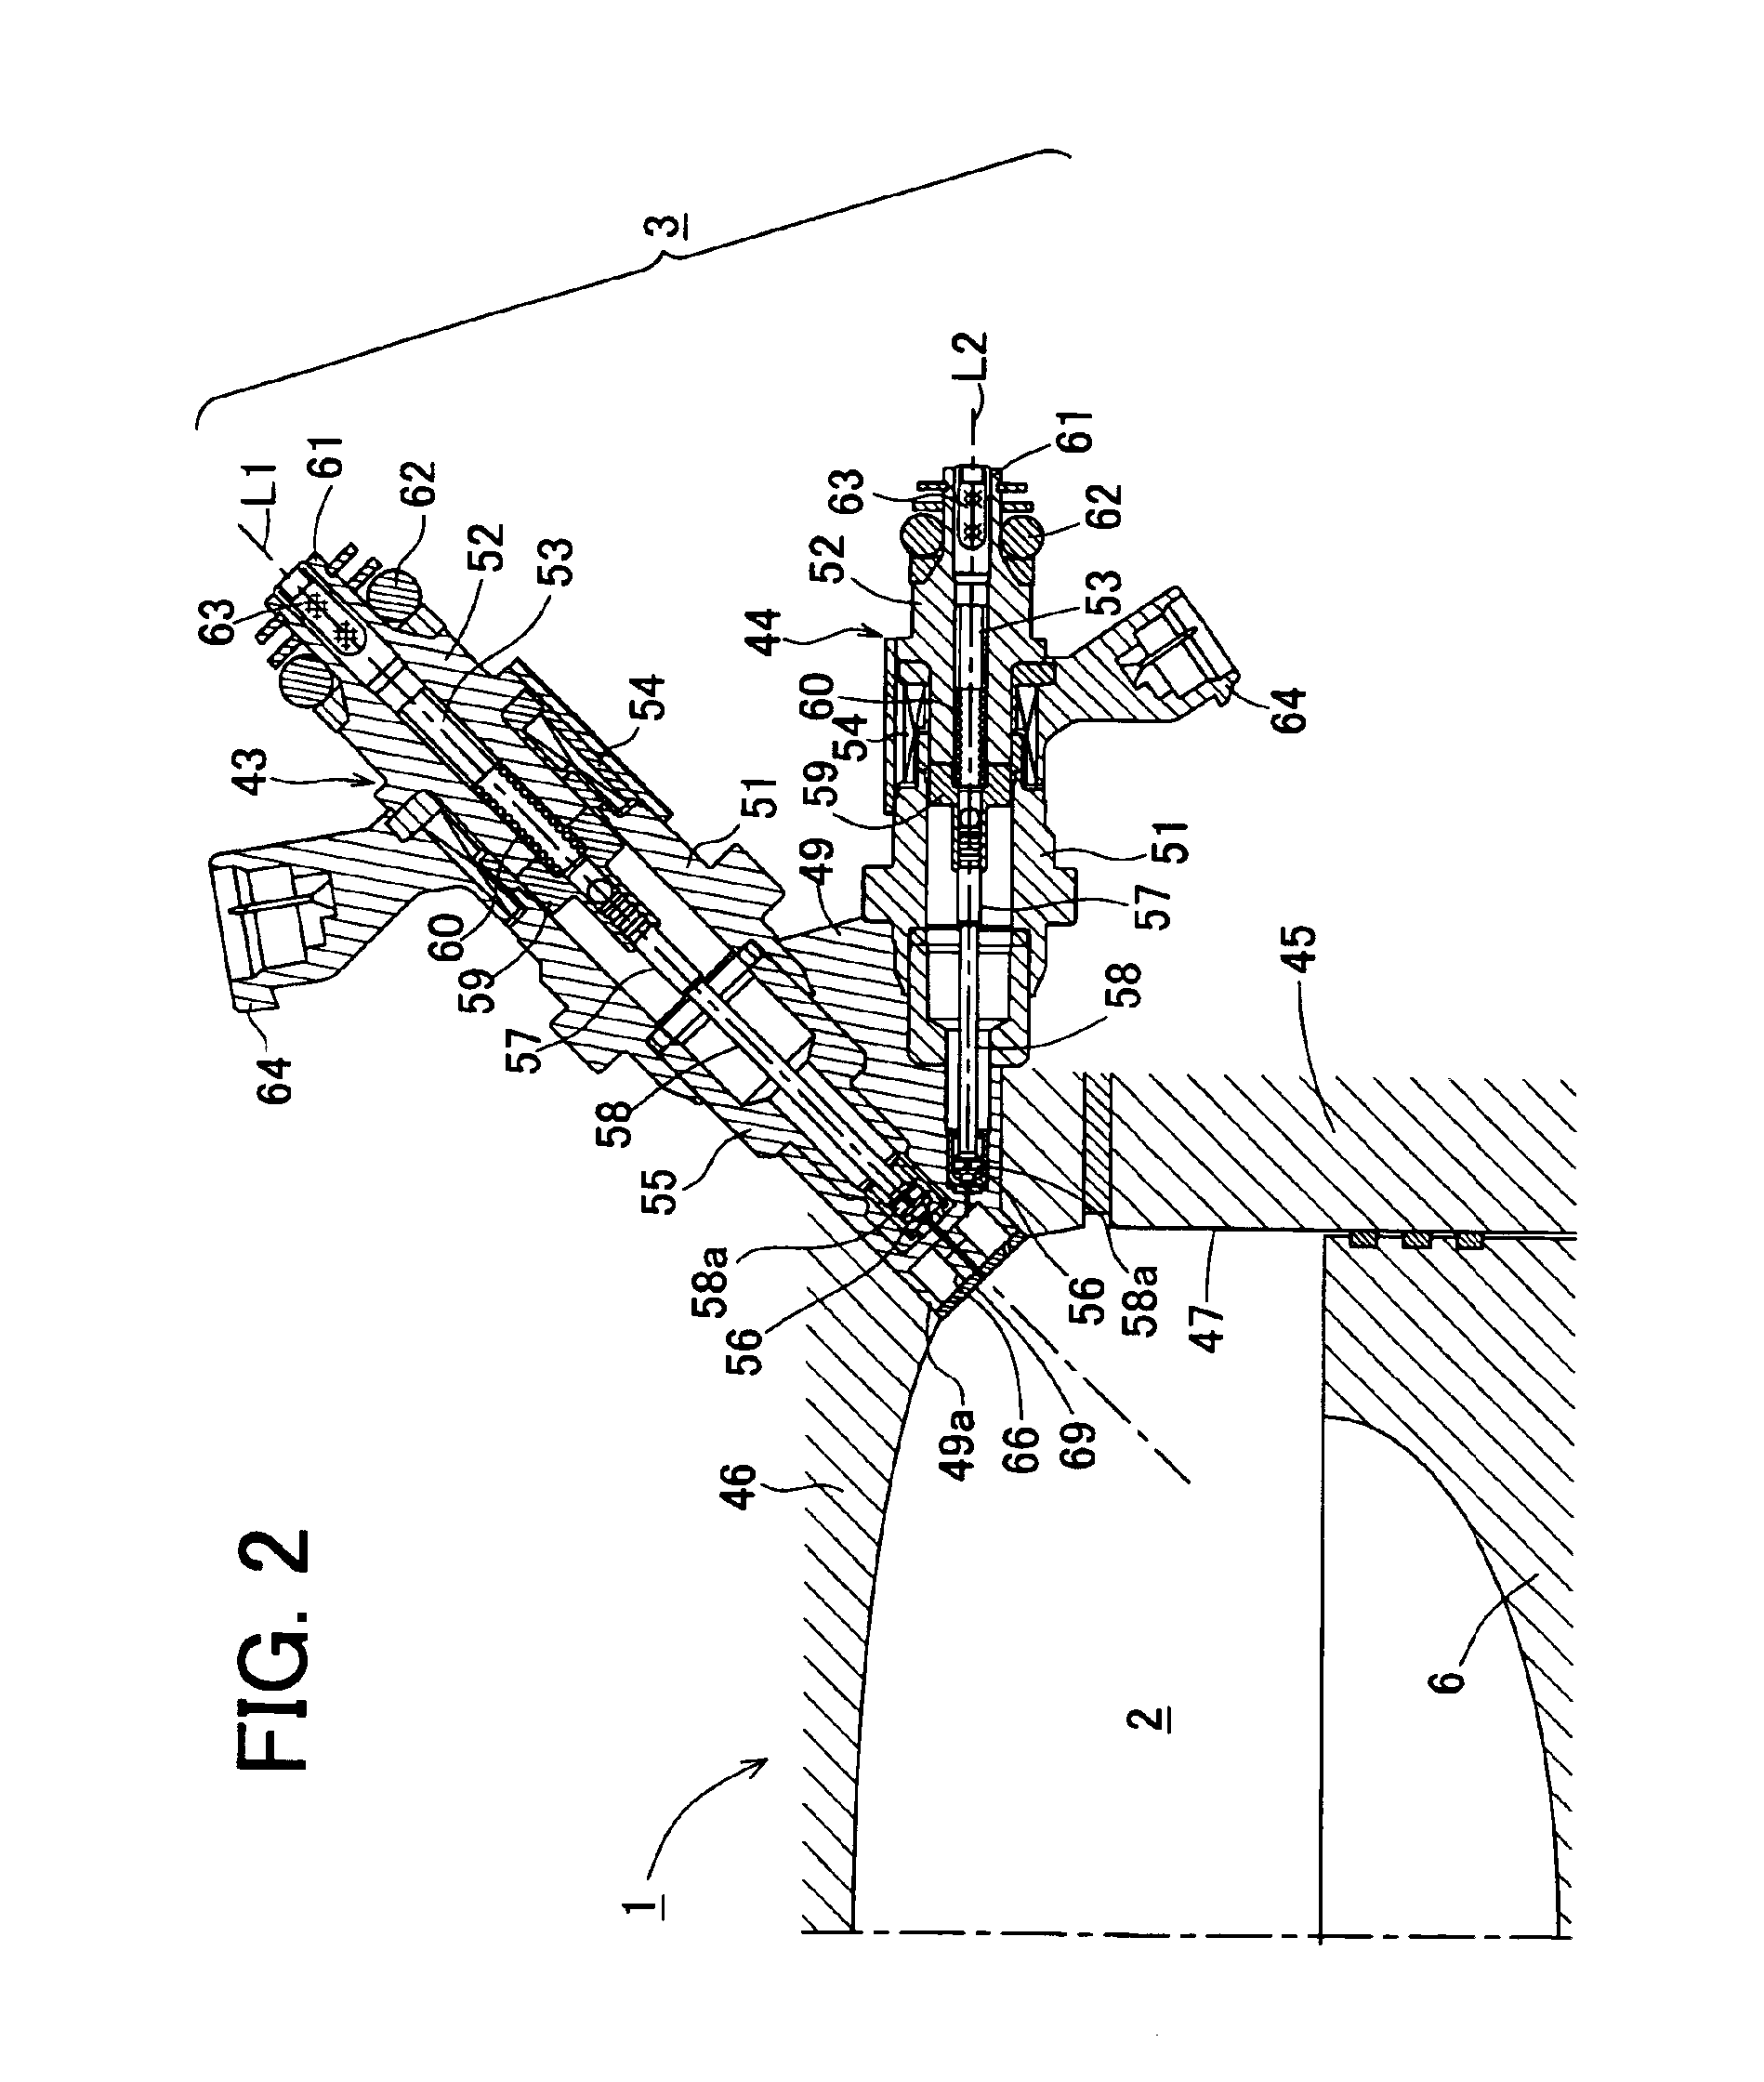 Fuel injection control devices for internal combustion engines